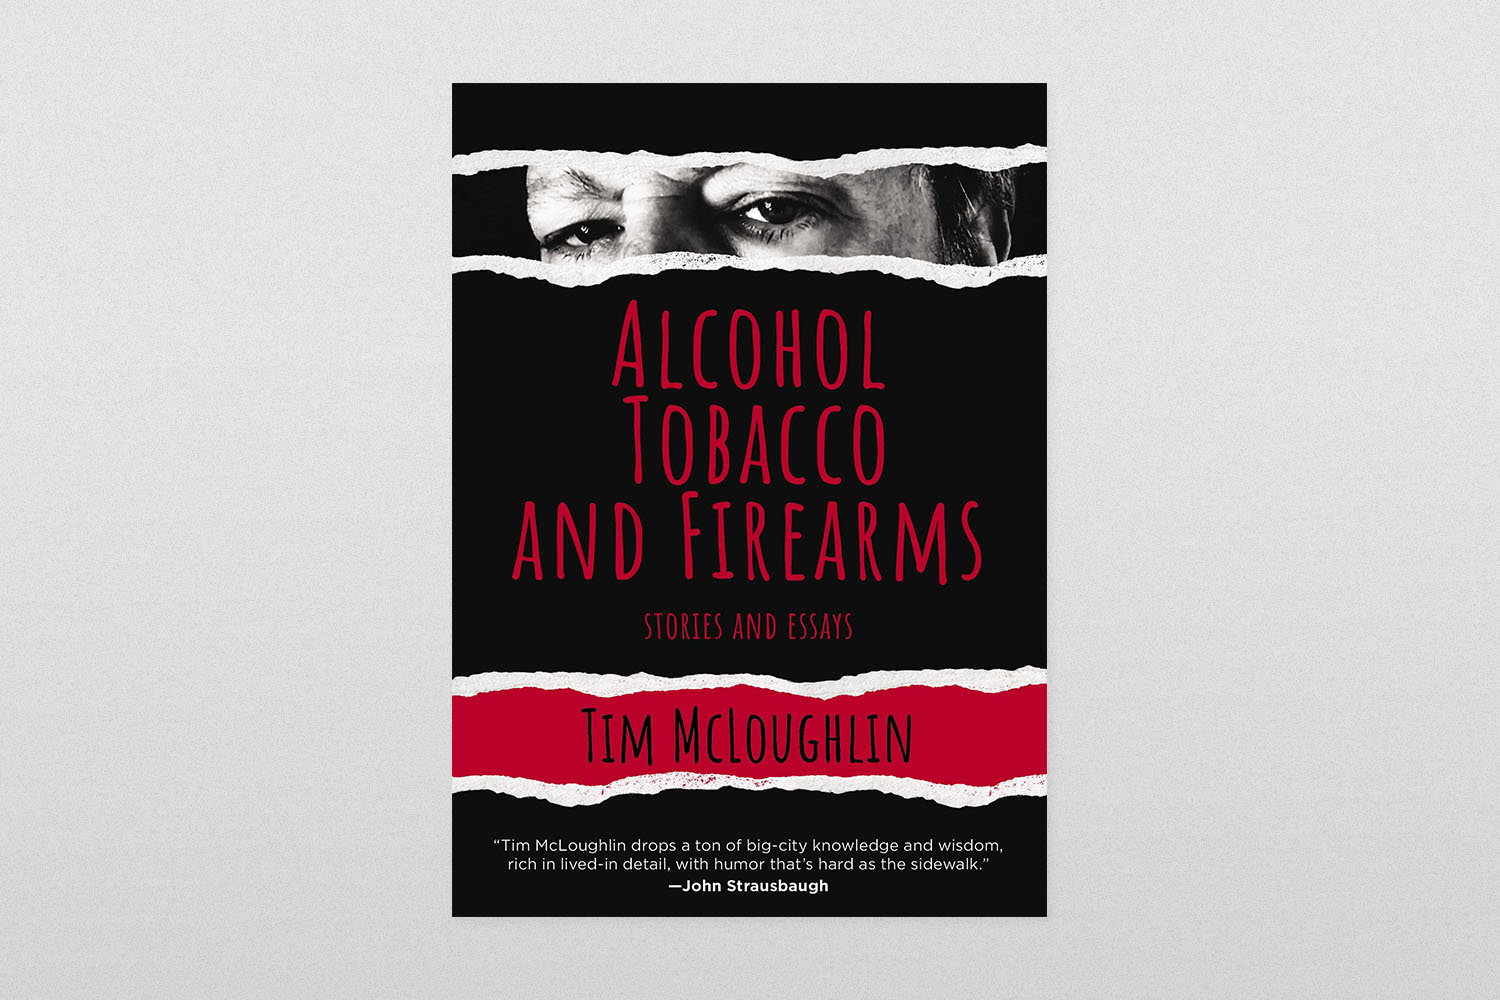 "Alcohol, Tobacco, and Firearms"